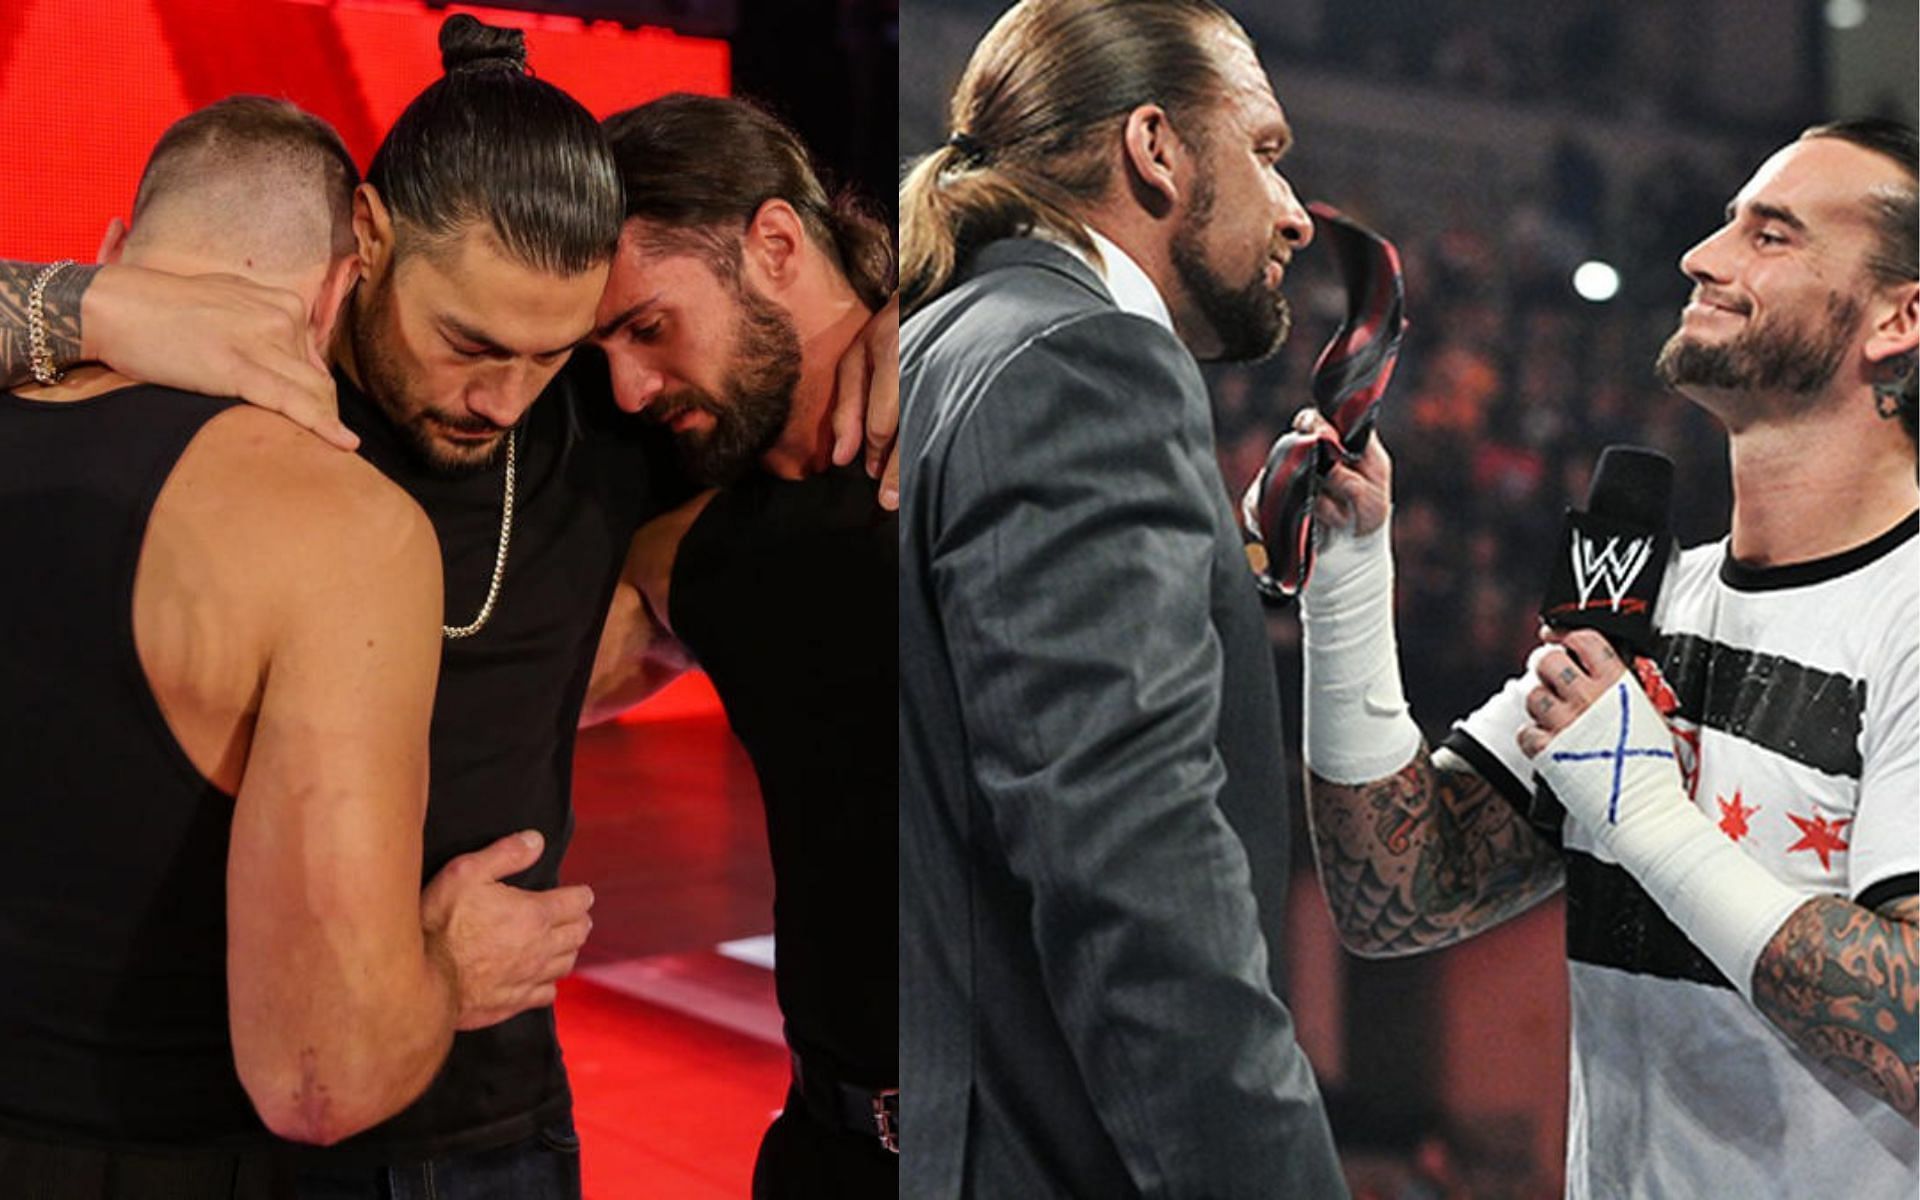 WWE allowed some renowned superstars to break character